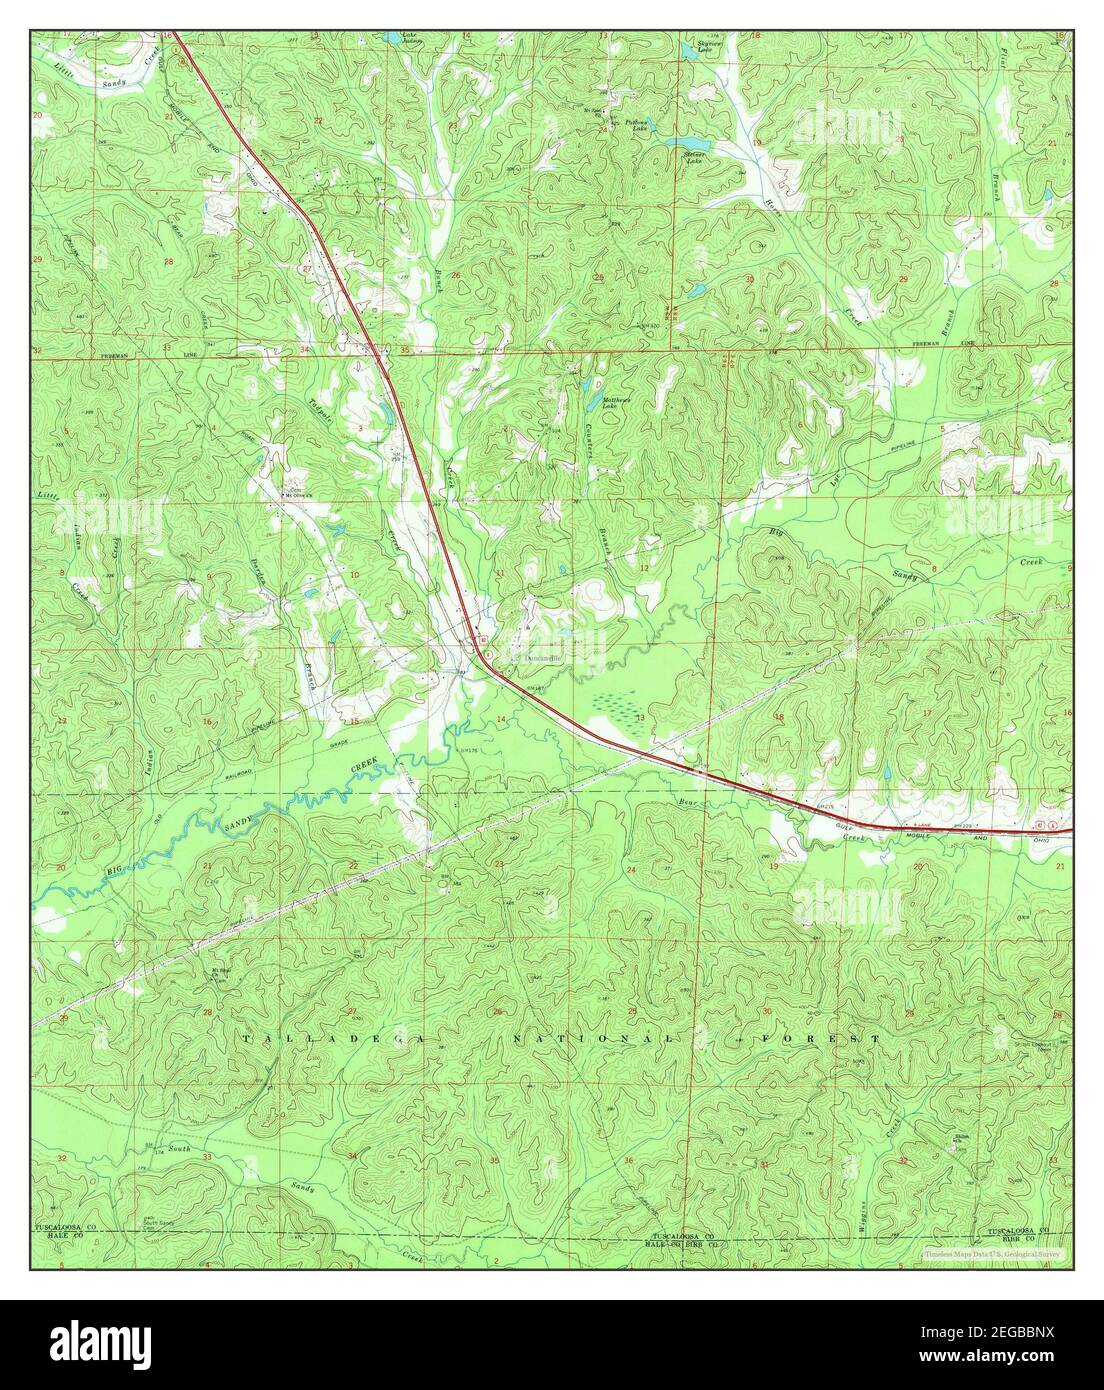 Duncanville, Alabama, map 1969, 1:24000, United States of America by Timeless Maps, data U.S. Geological Survey Stock Photo